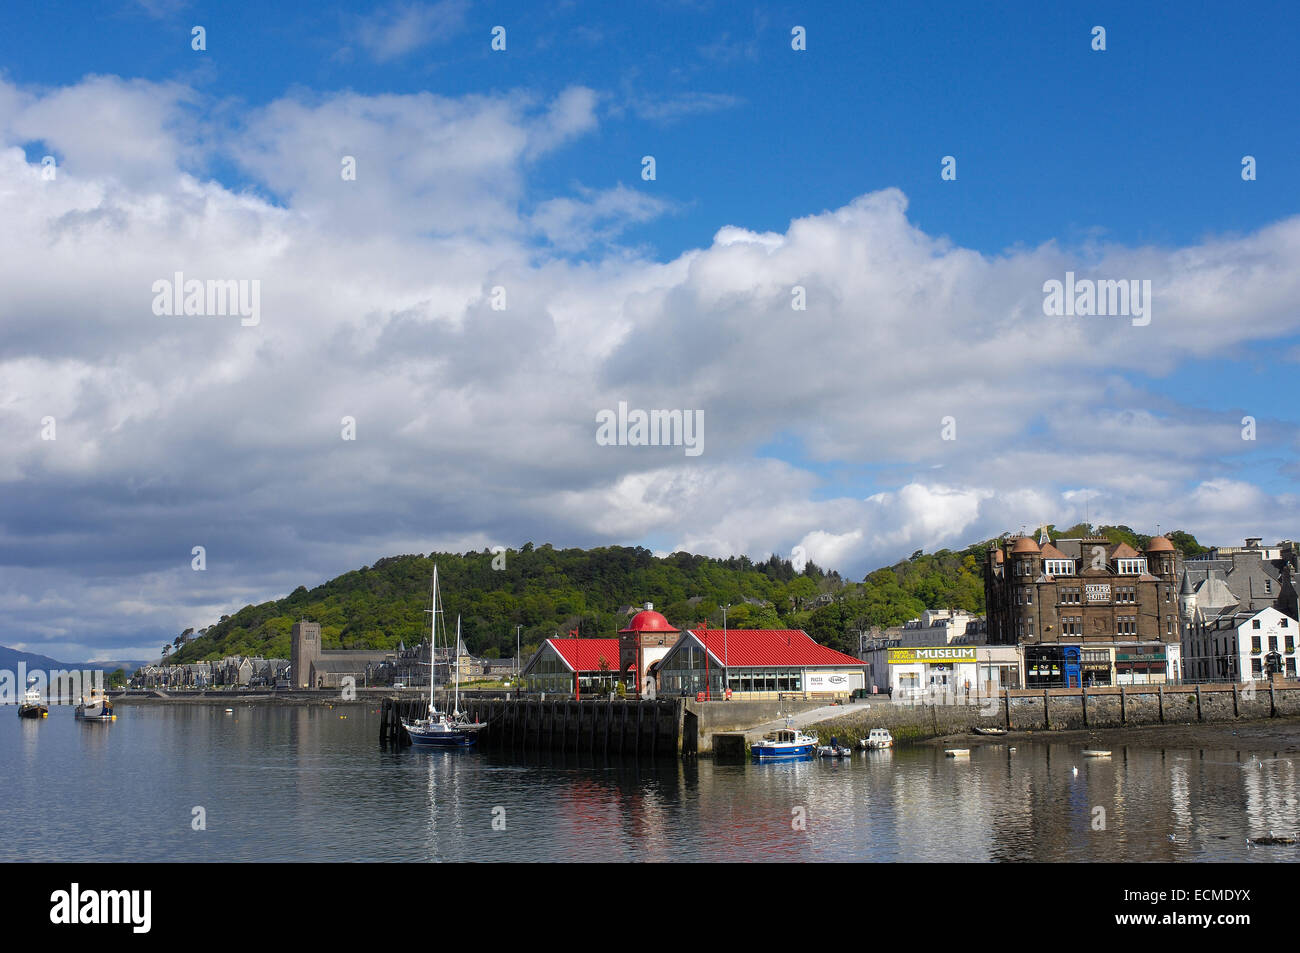 West Highlands, Oban, Argyll and Bute, Ecosse, Royaume-Uni, Europe Banque D'Images